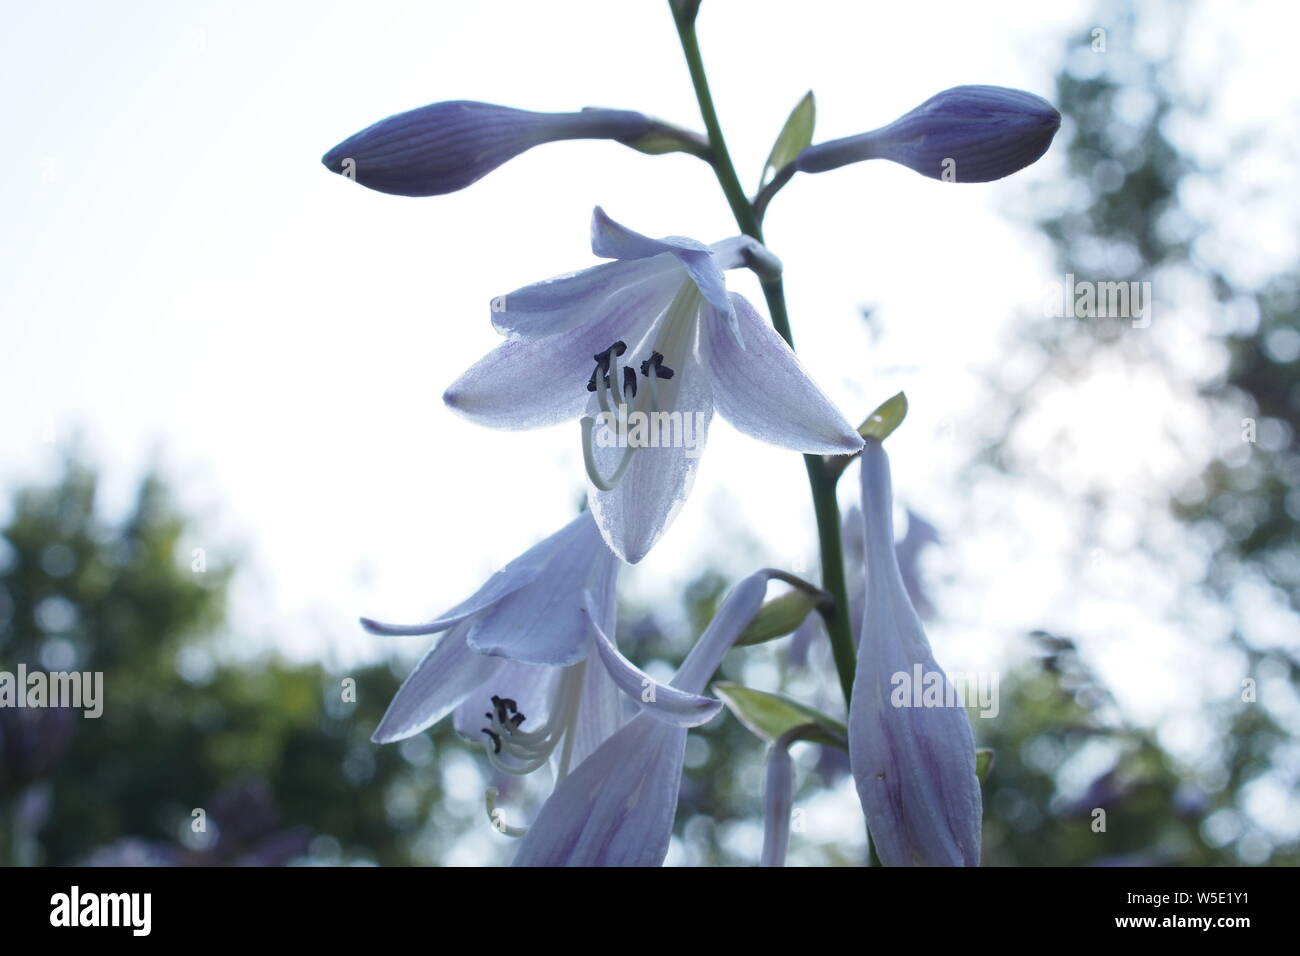 White tinged with purple flower and buds of a Natal lily (Crinum moorei). Stock Photo